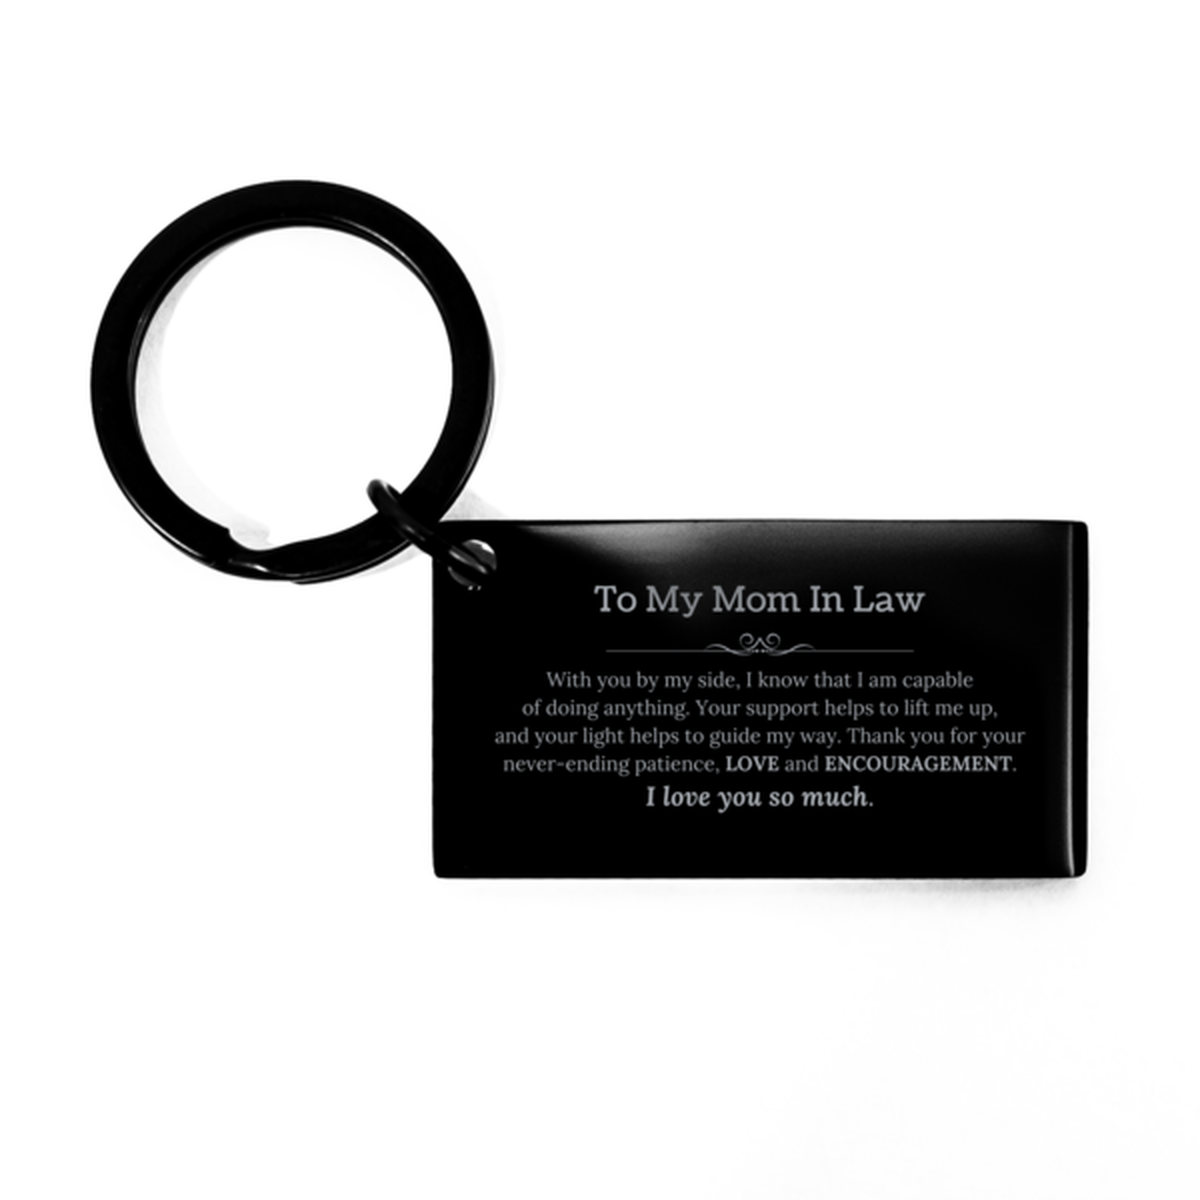 Appreciation Mom In Law Keychain Gifts, To My Mom In Law Birthday Christmas Wedding Keepsake Gifts for Mom In Law With you by my side, I know that I am capable of doing anything. I love you so much